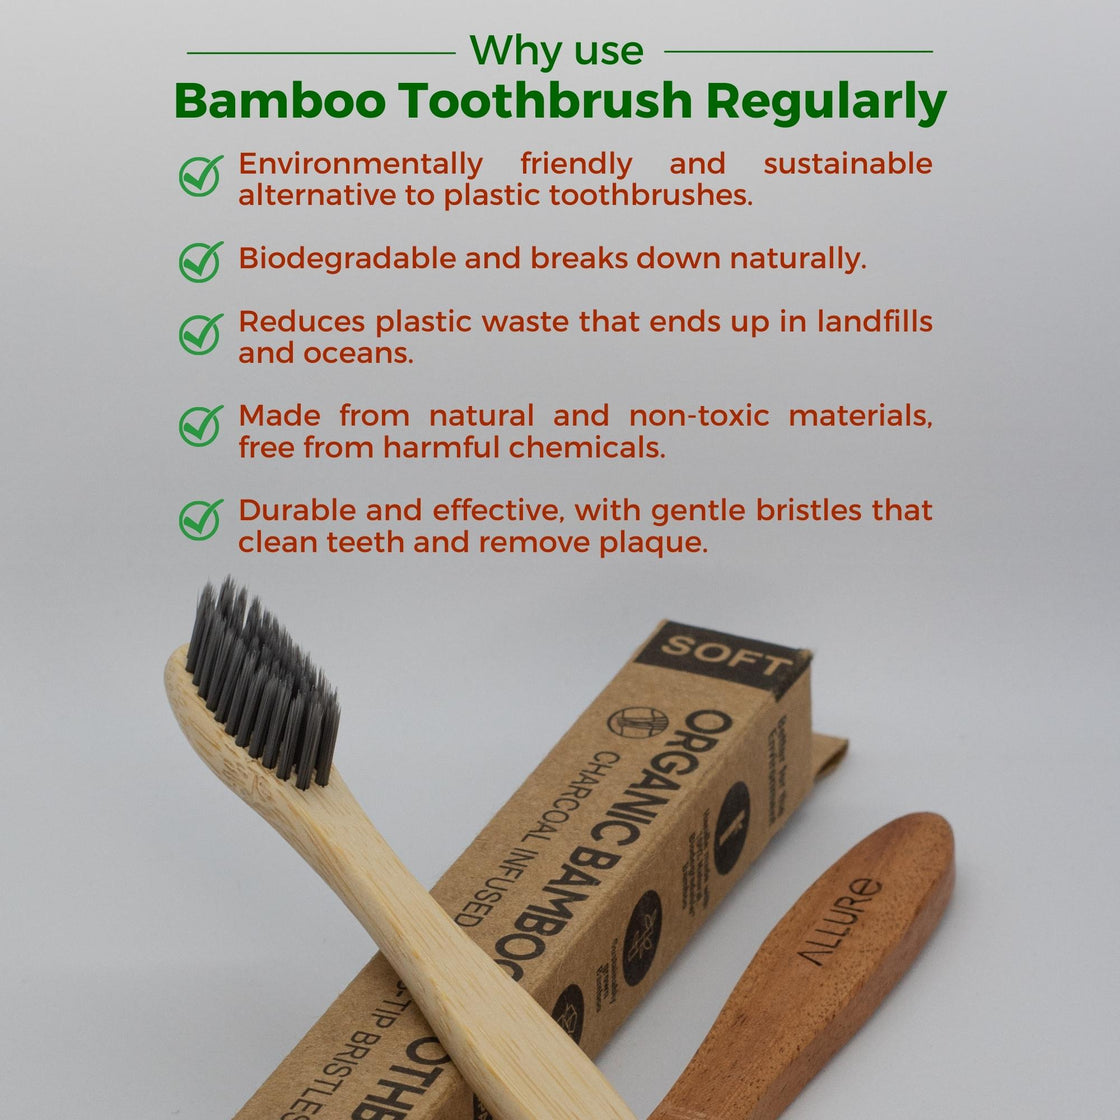 Allure Bamboo Toothbrush with Organic Tounge Cleaner (OT-01 + OTC)